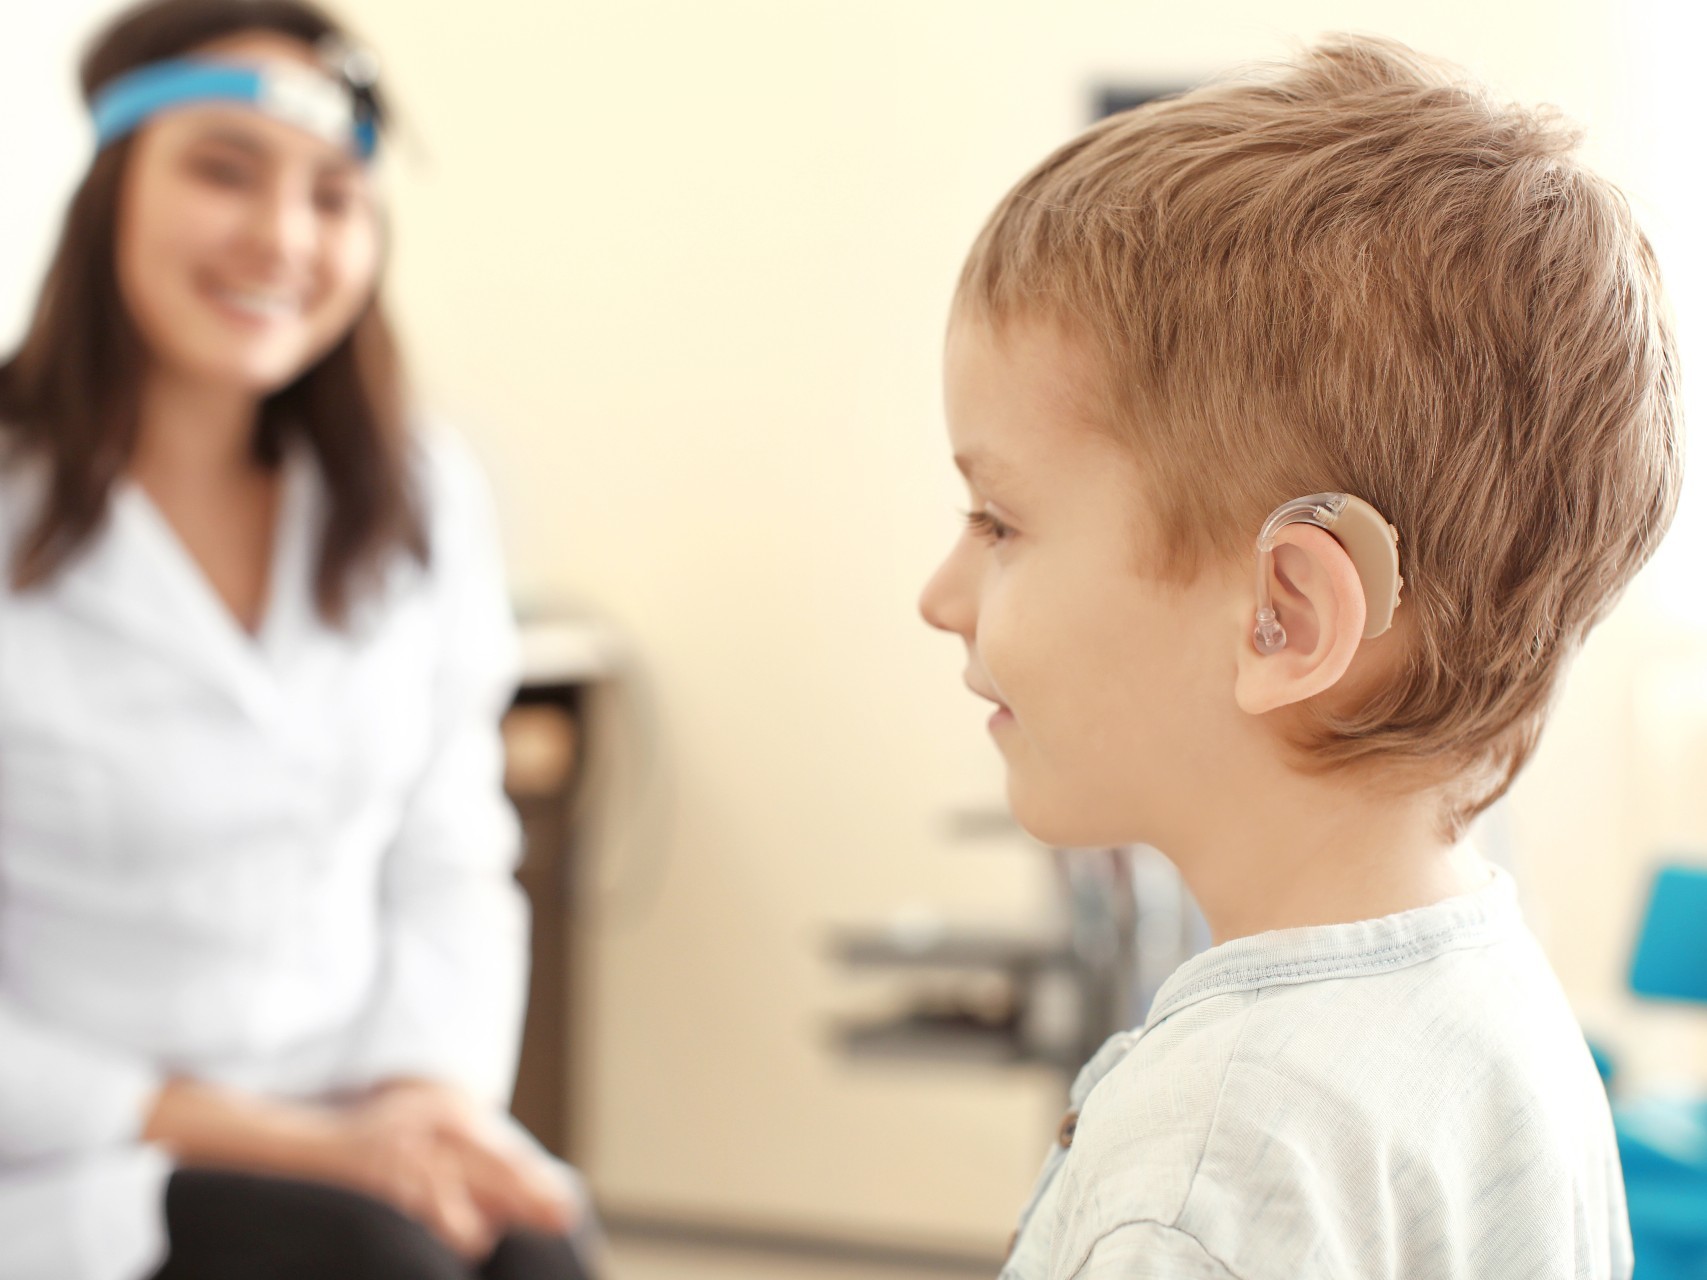 How to identify hearing impairments in children and why early diagnosis is important